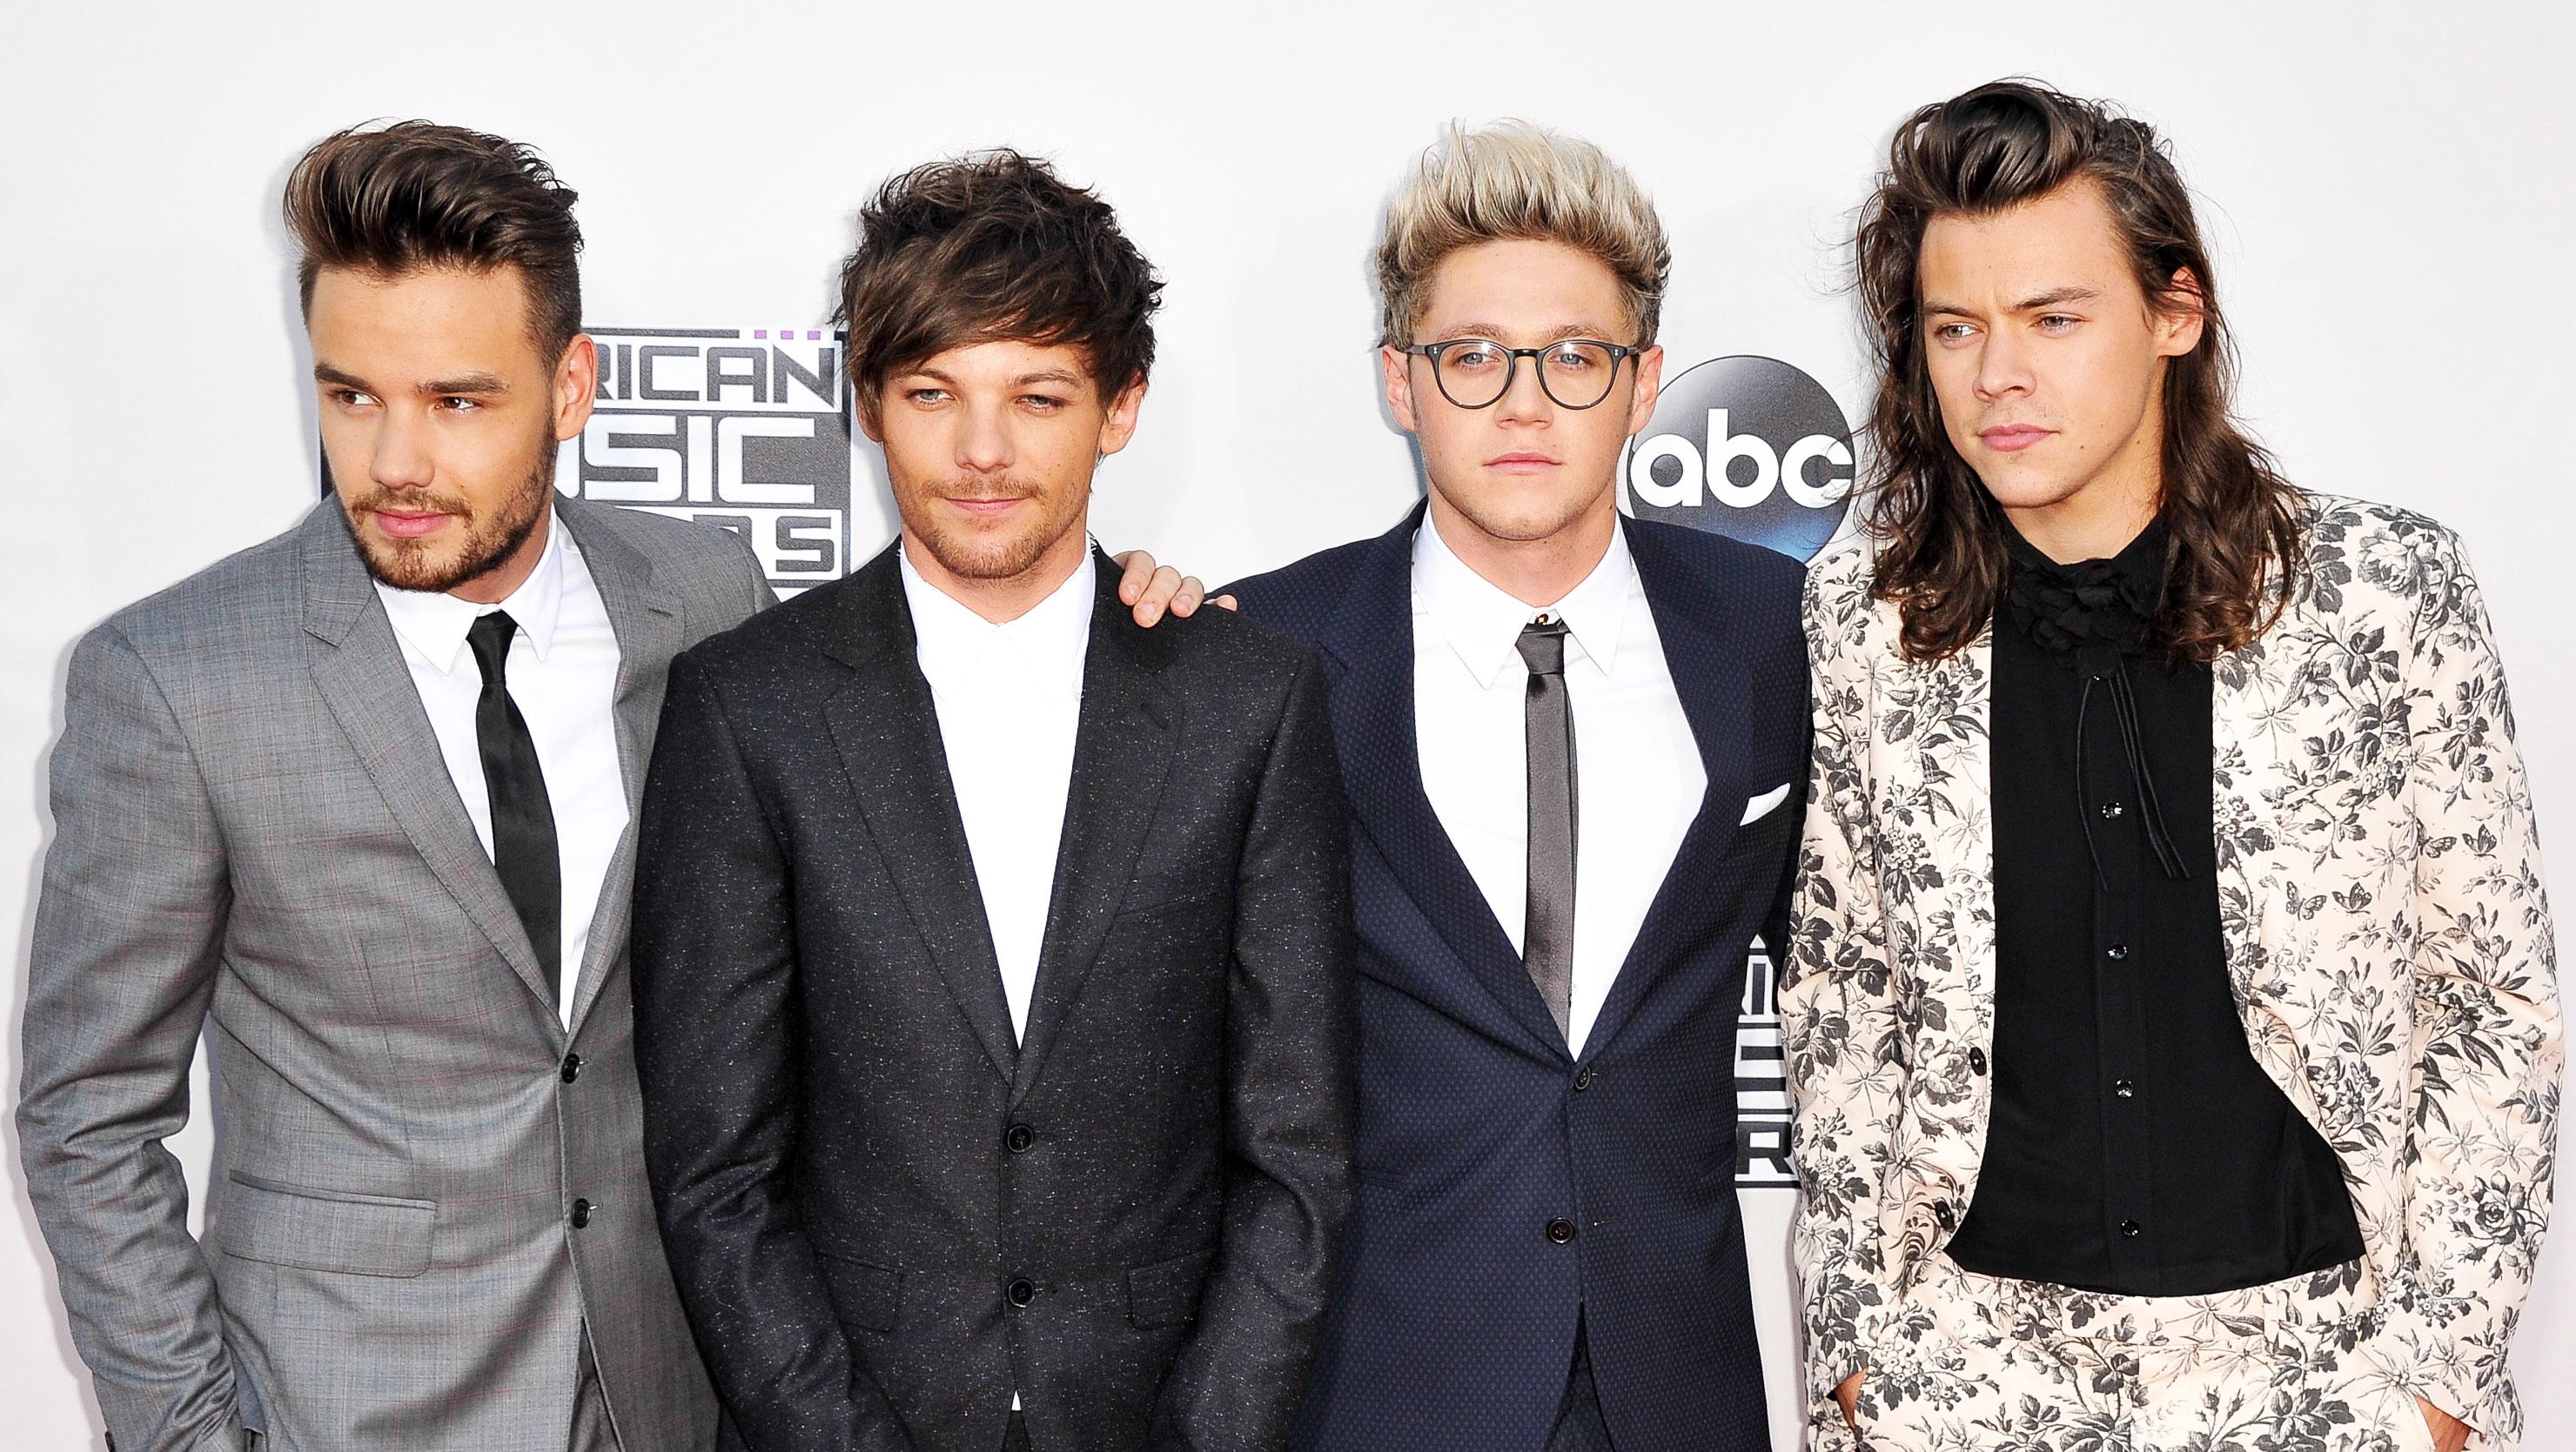 One Direction Fans React to Rumors the Band's Breaking Up